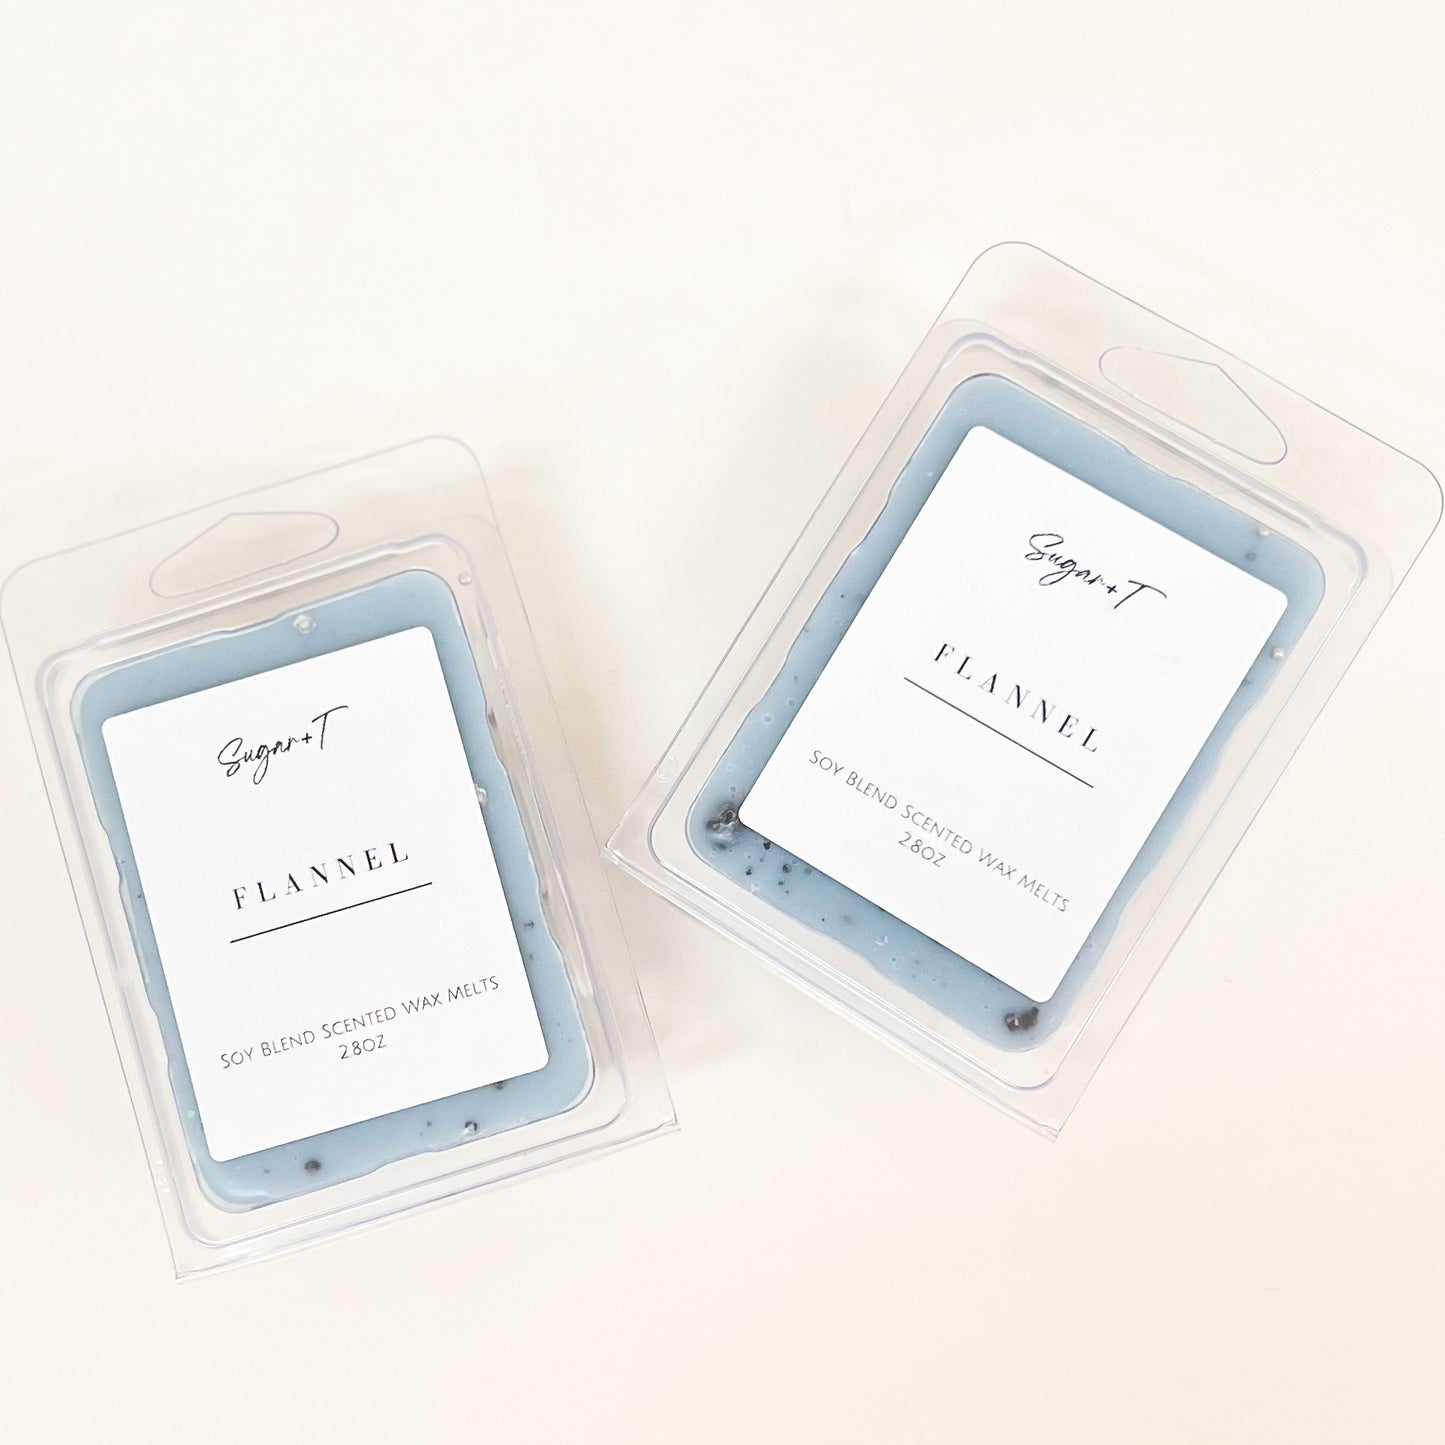 Flannel Scented Wax Melts